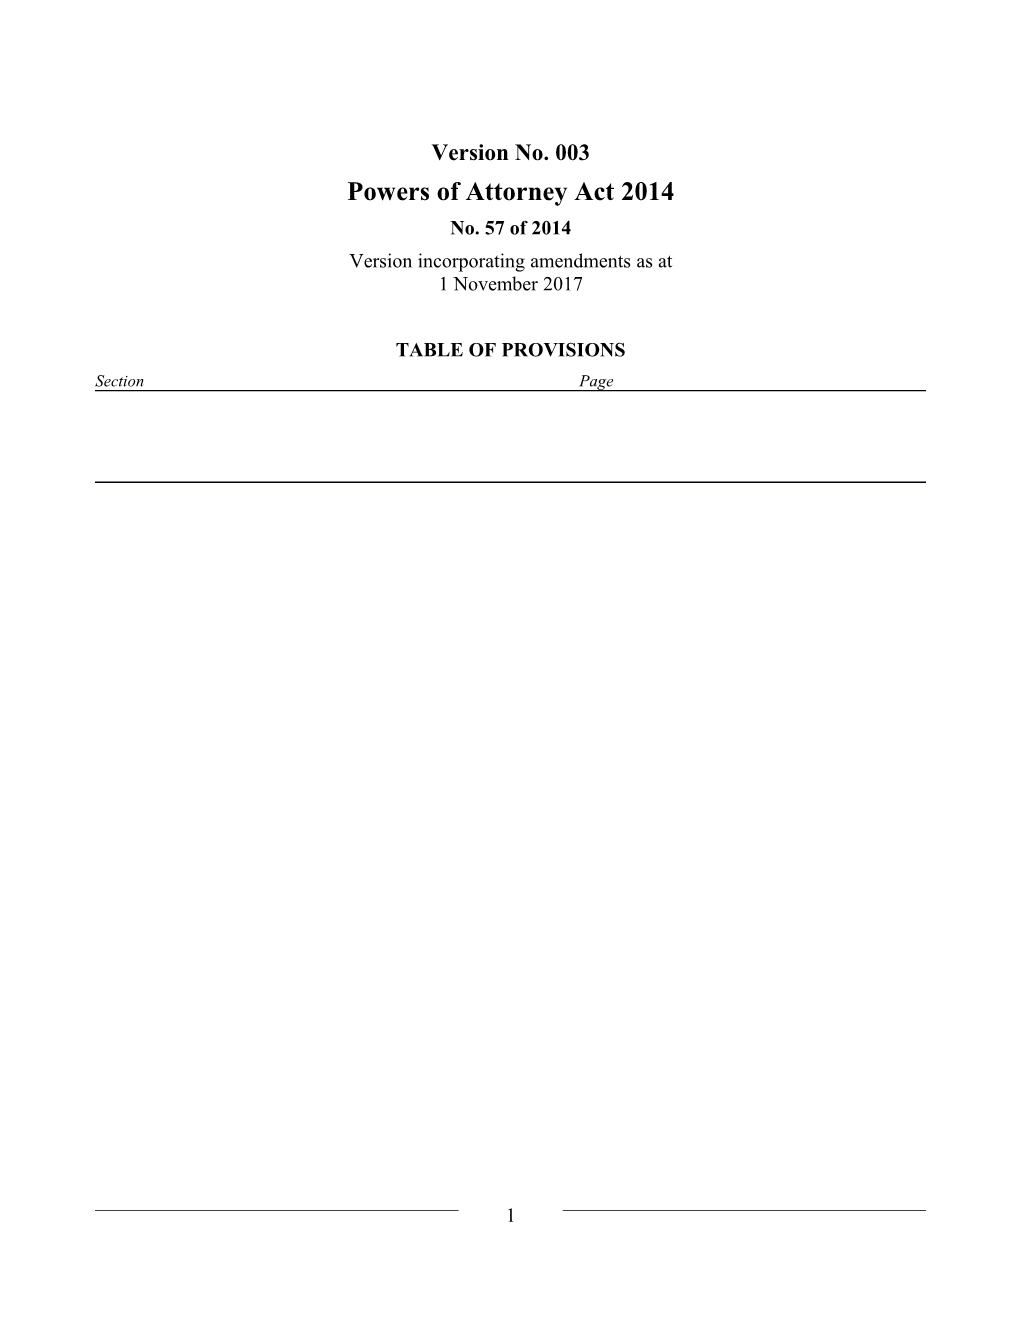 Powers of Attorney Act 2014